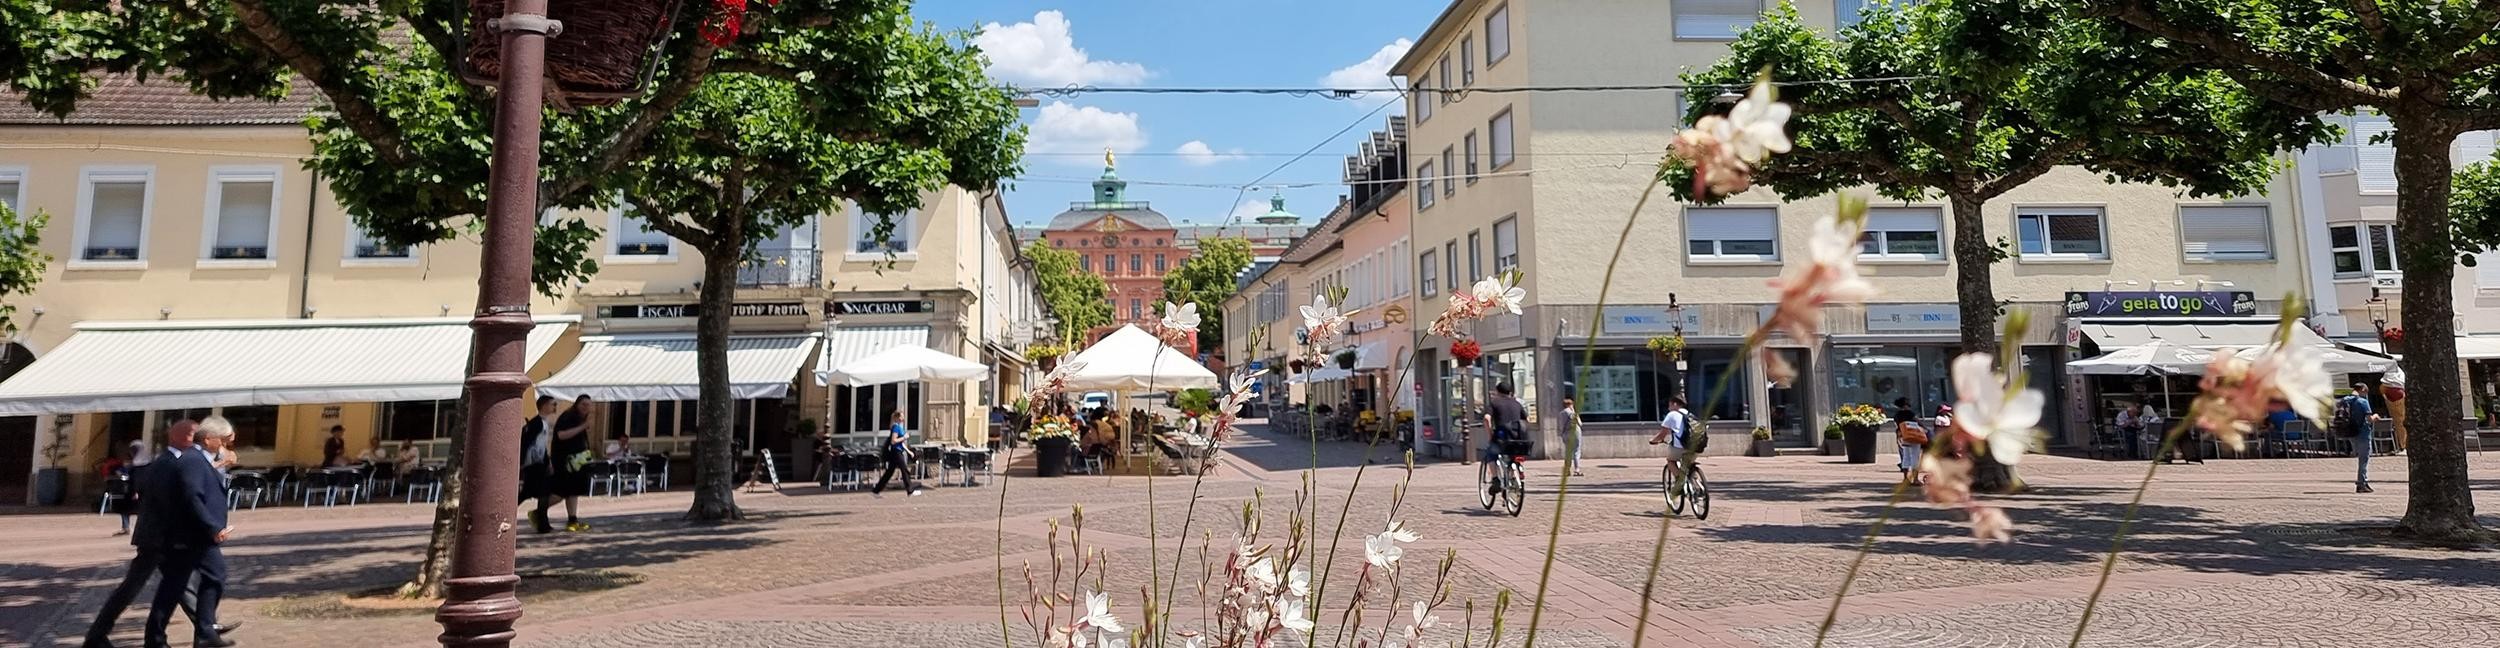 Rastatt market square with a view of the castle